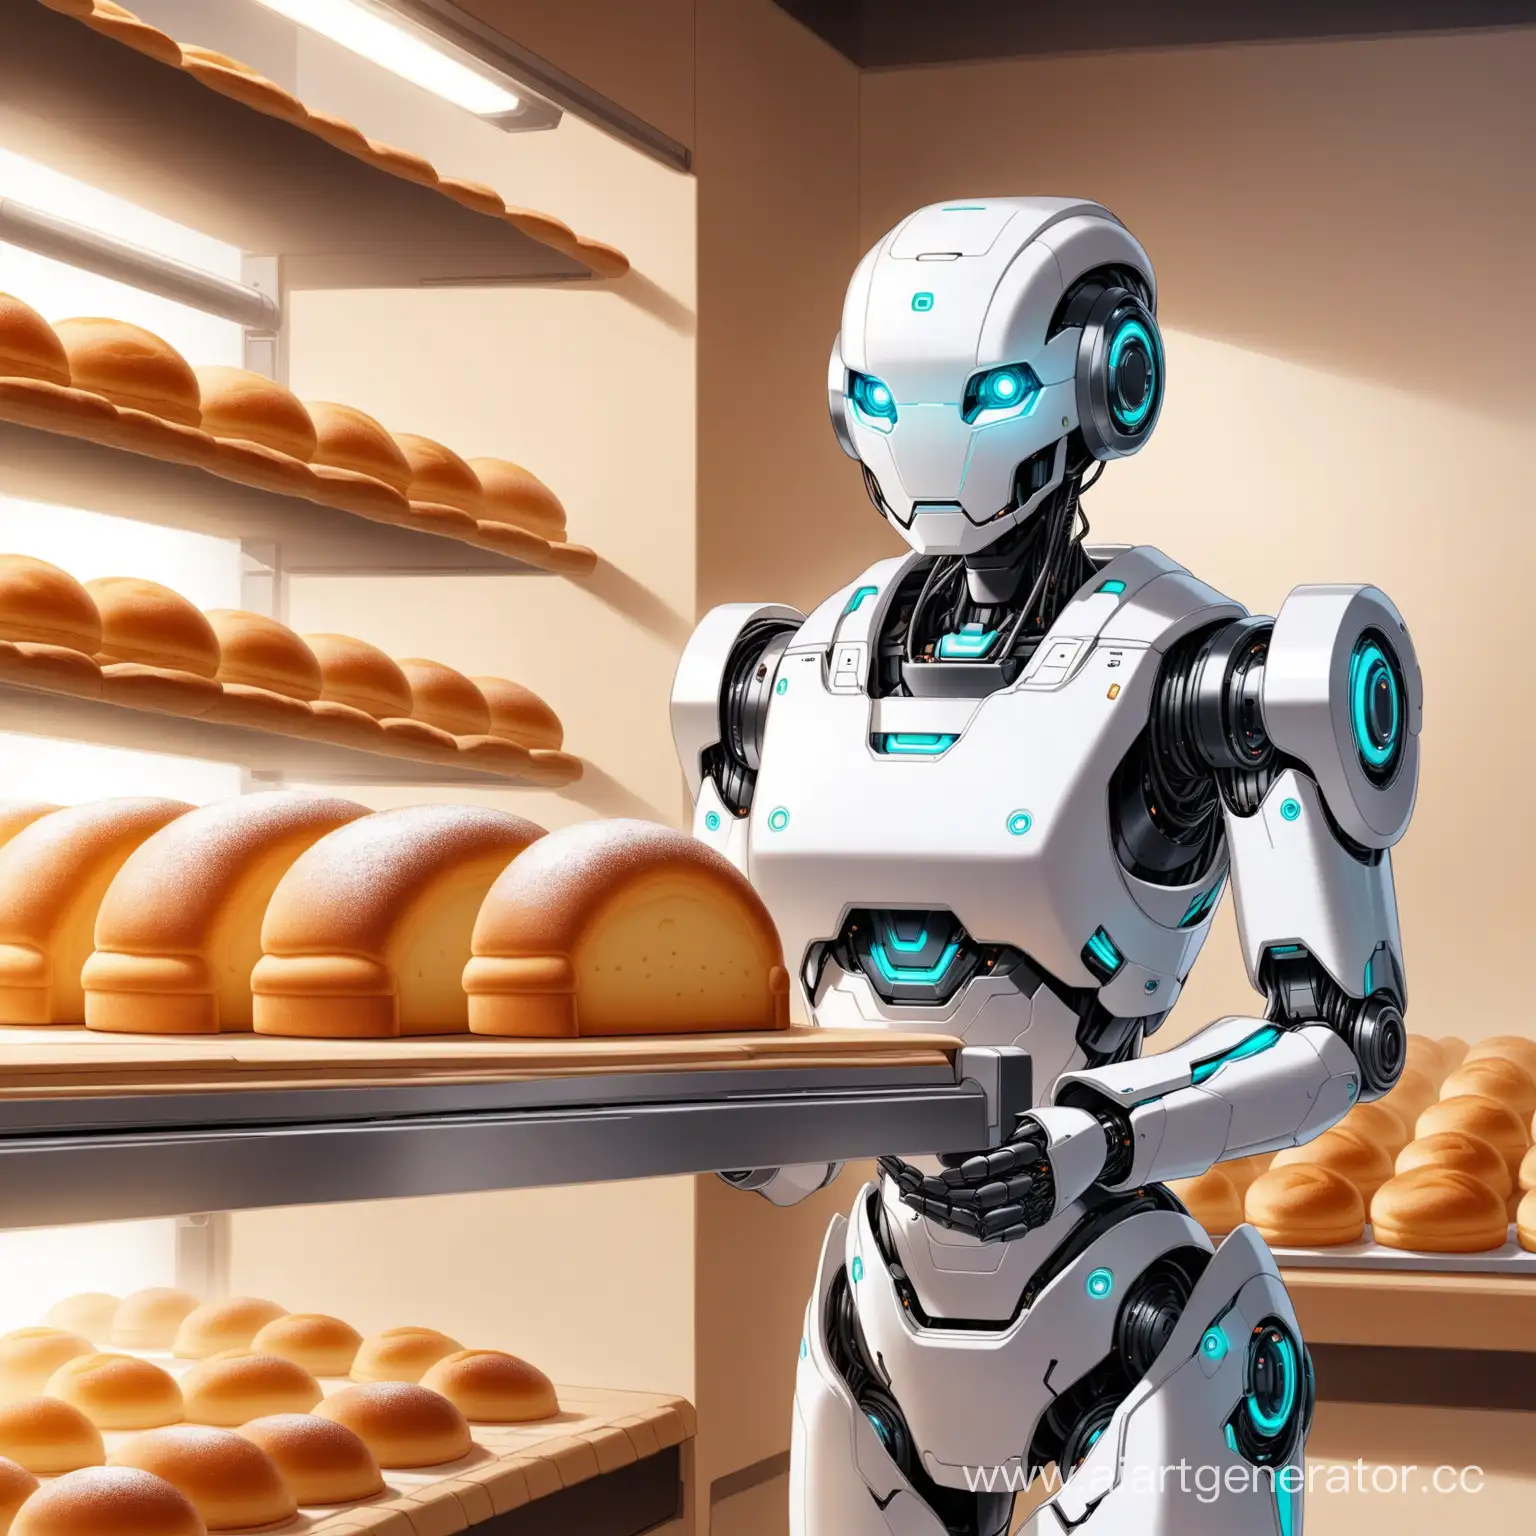 Automated-Bakery-Robotic-Production-of-Pastries